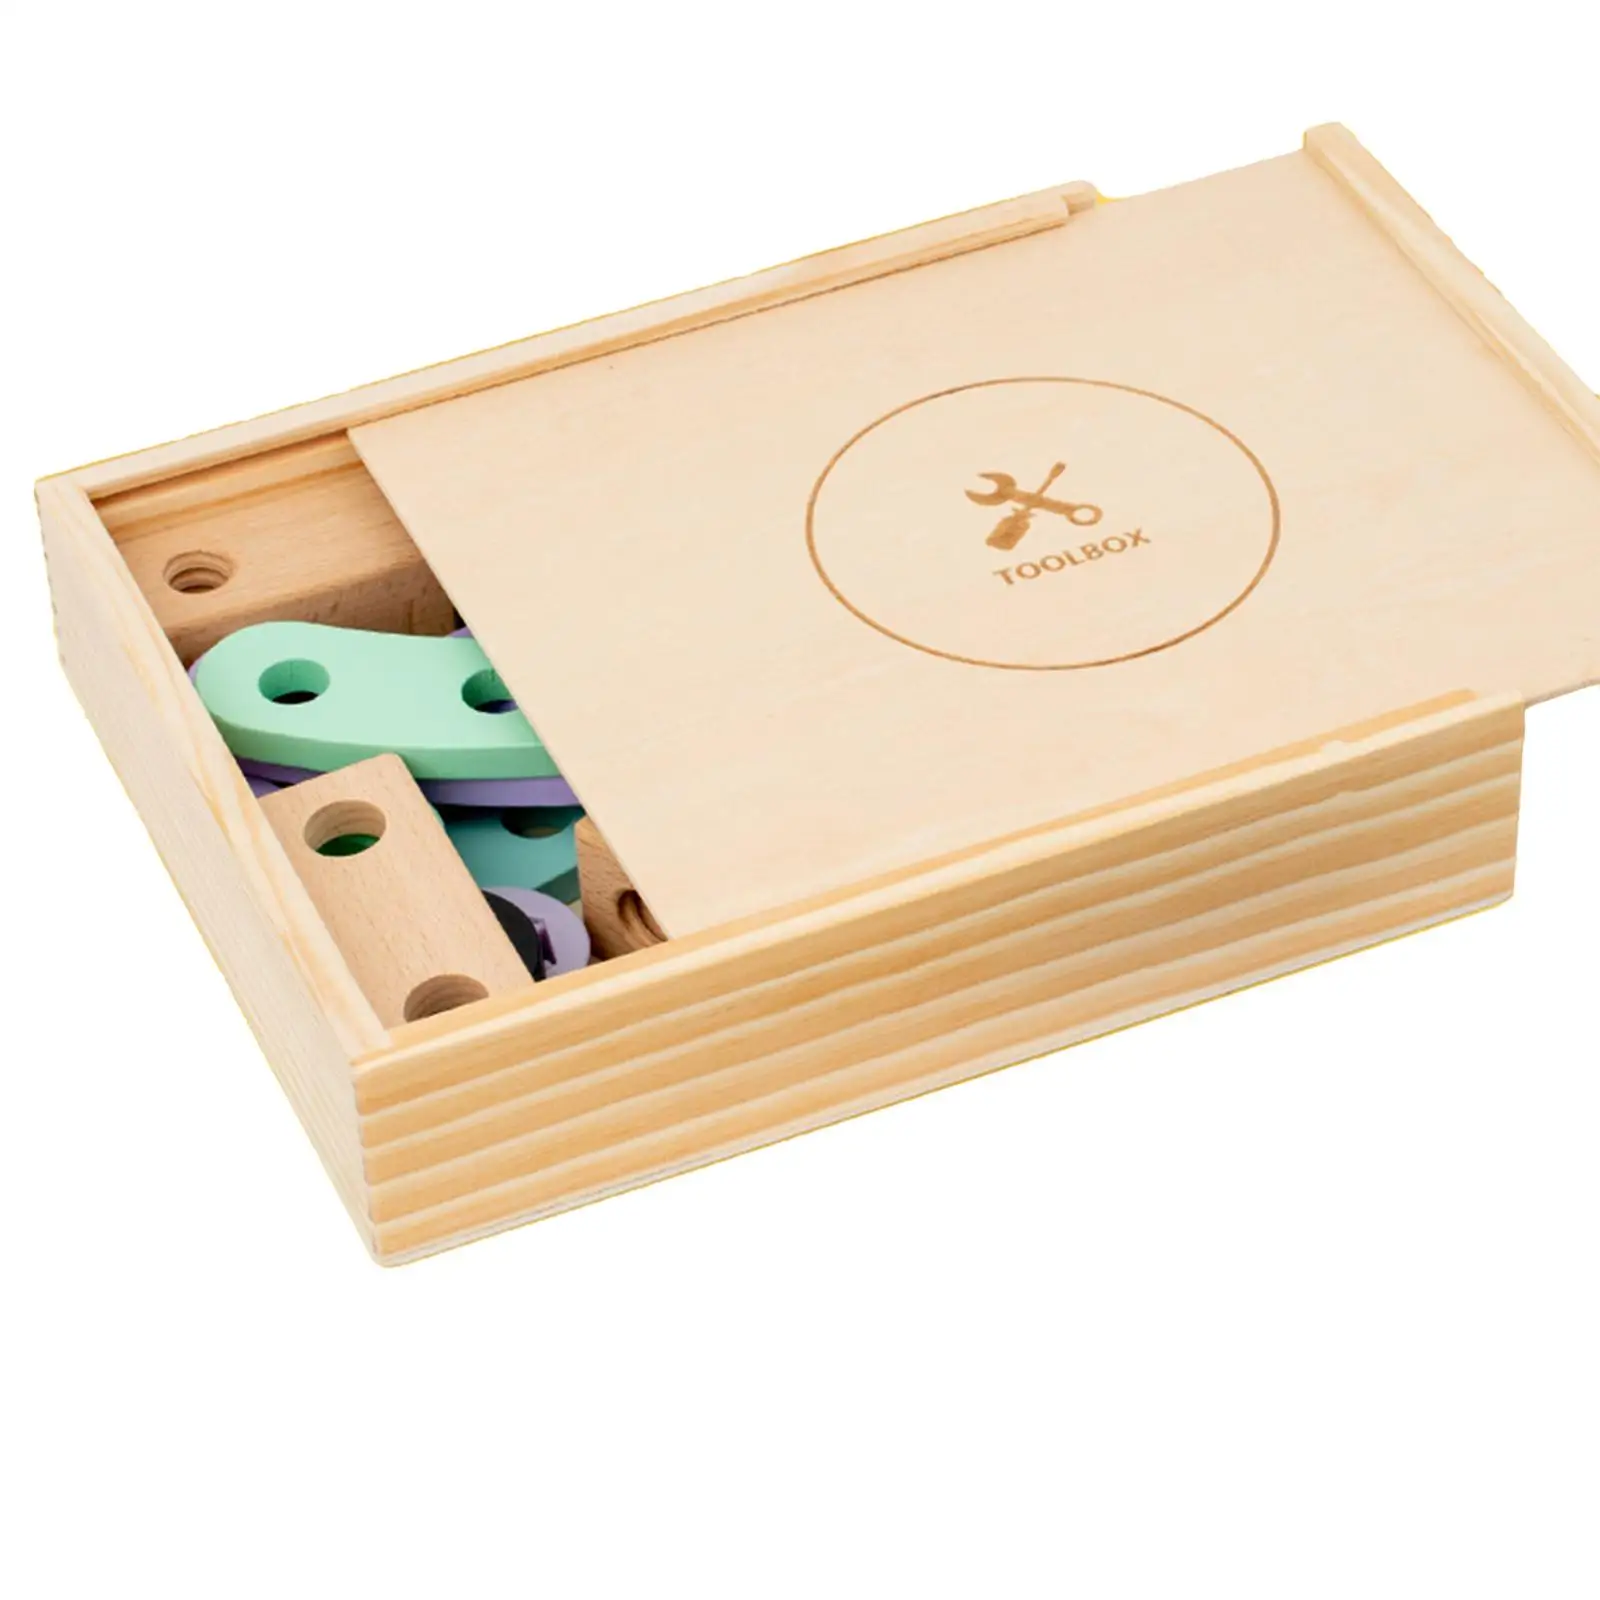 Wooden Repair Tool Box Toy Smooth Educational Toy for Children Toddler Baby